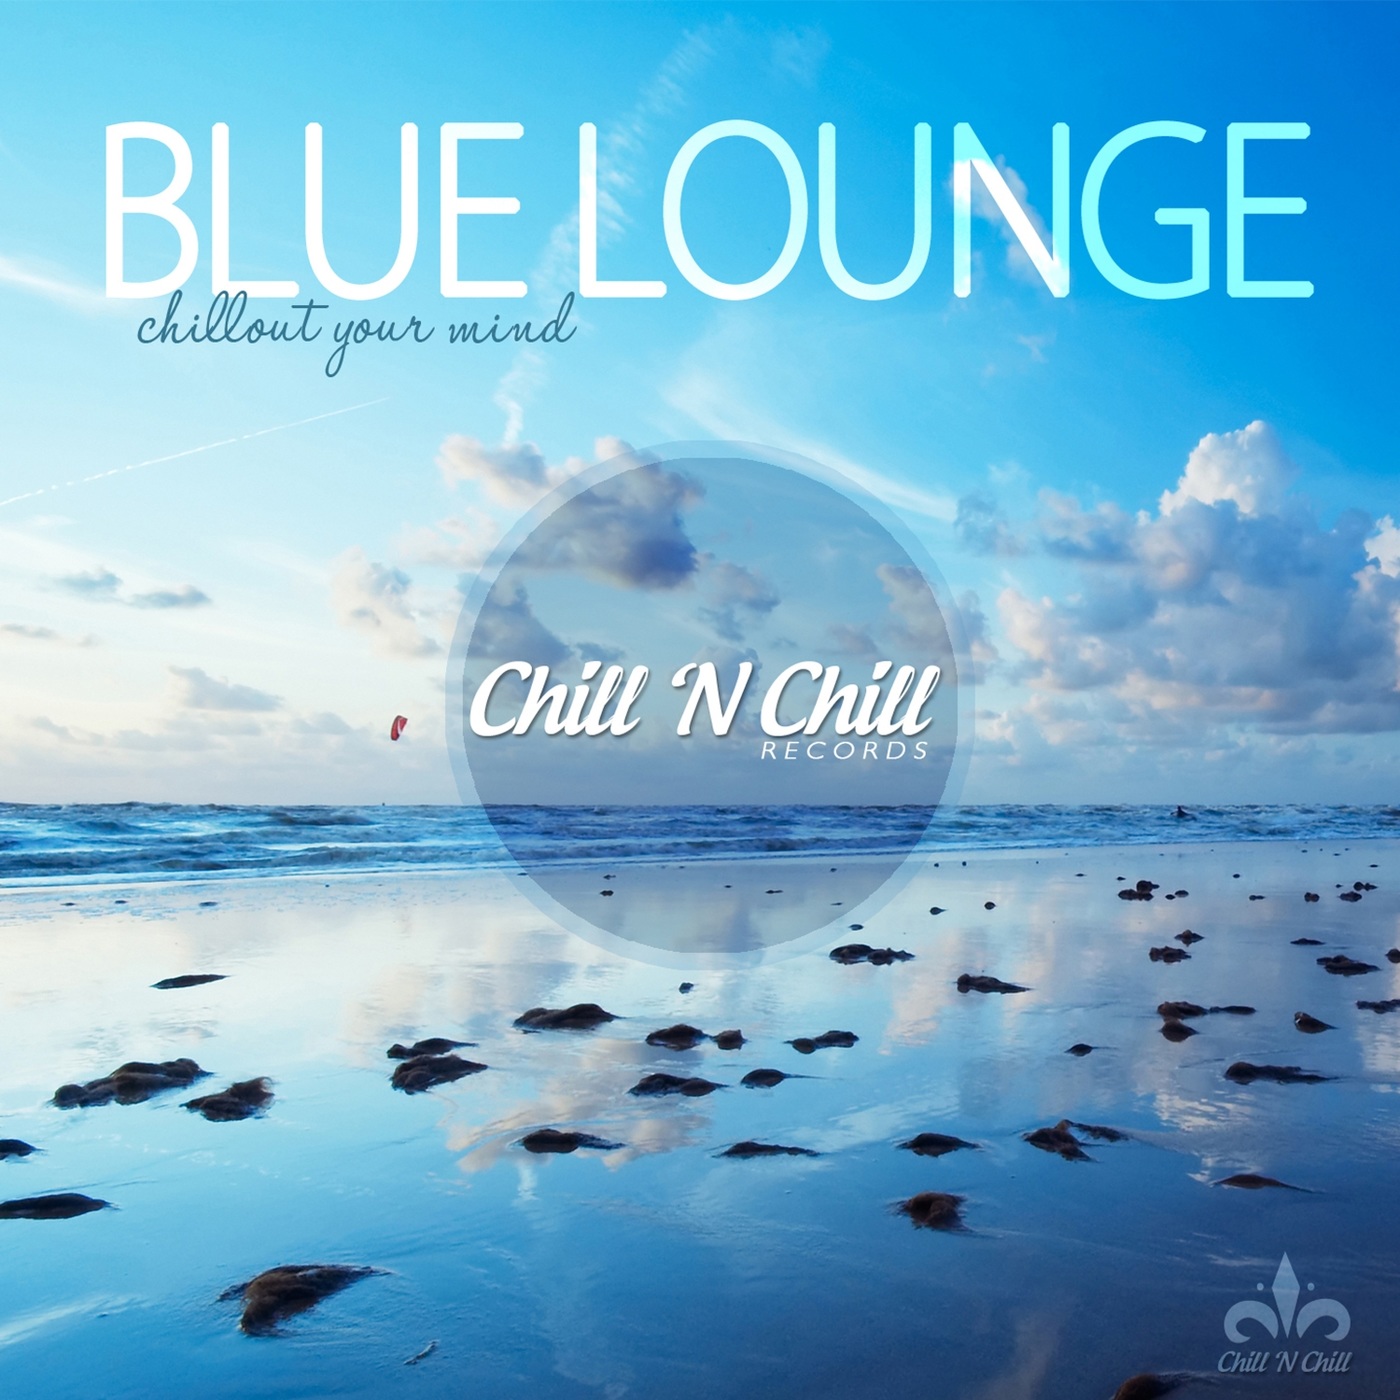 chill n chill records《blue lounge：chillout your mind》cd级无损44.